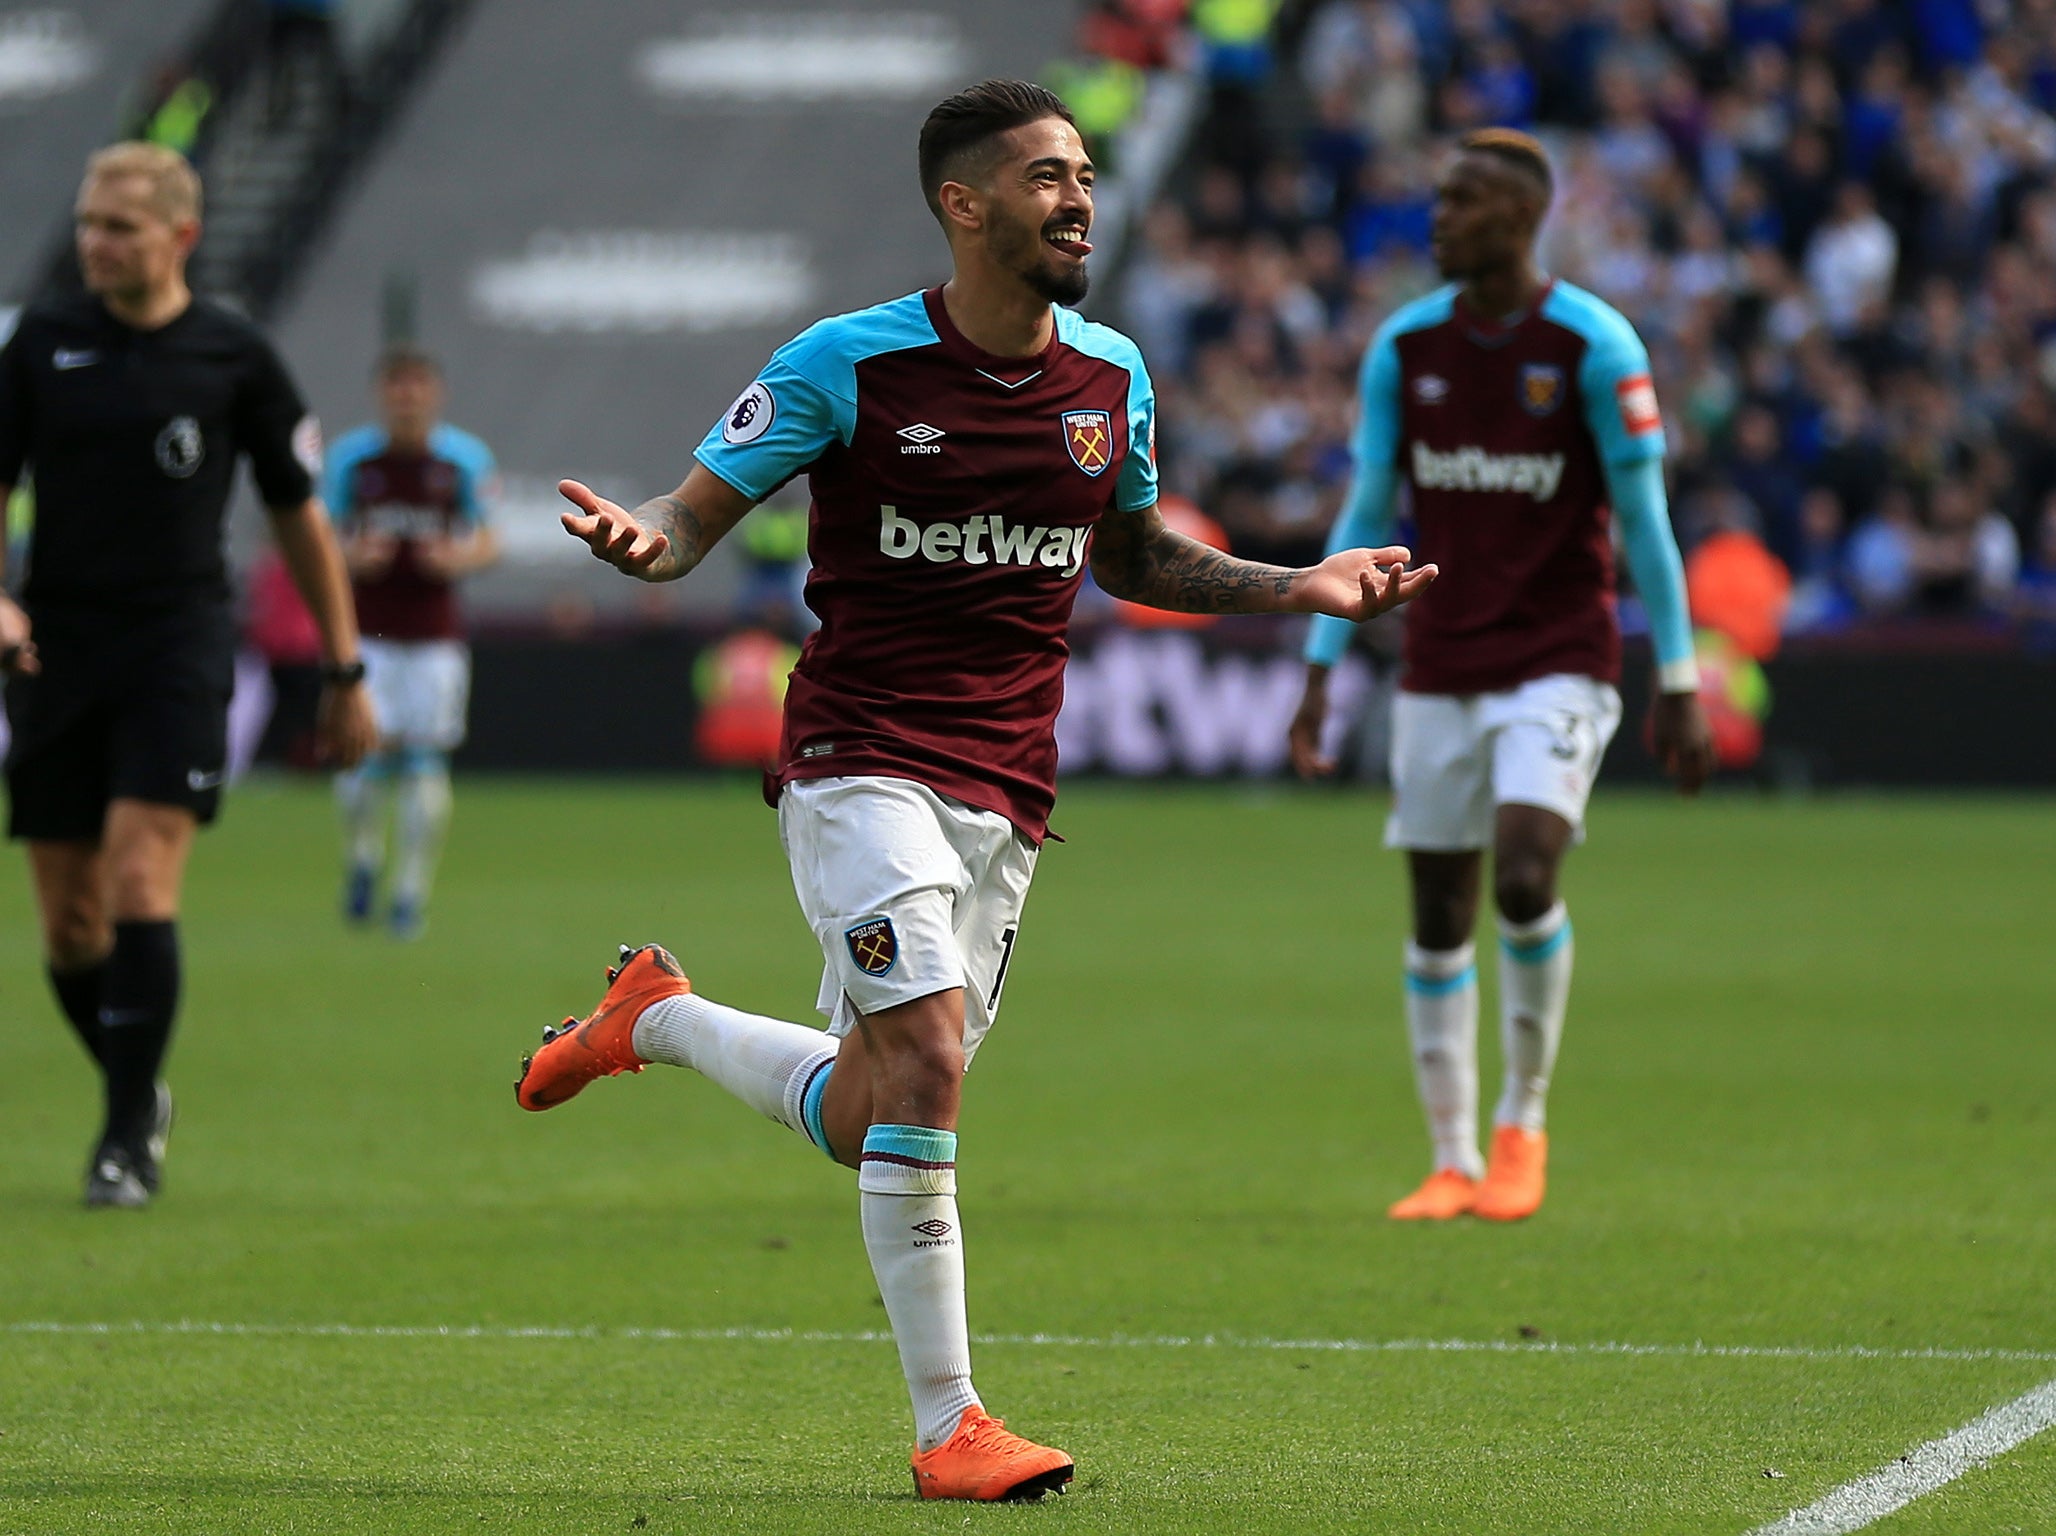 Manuel Lanzini ended the season on a high note